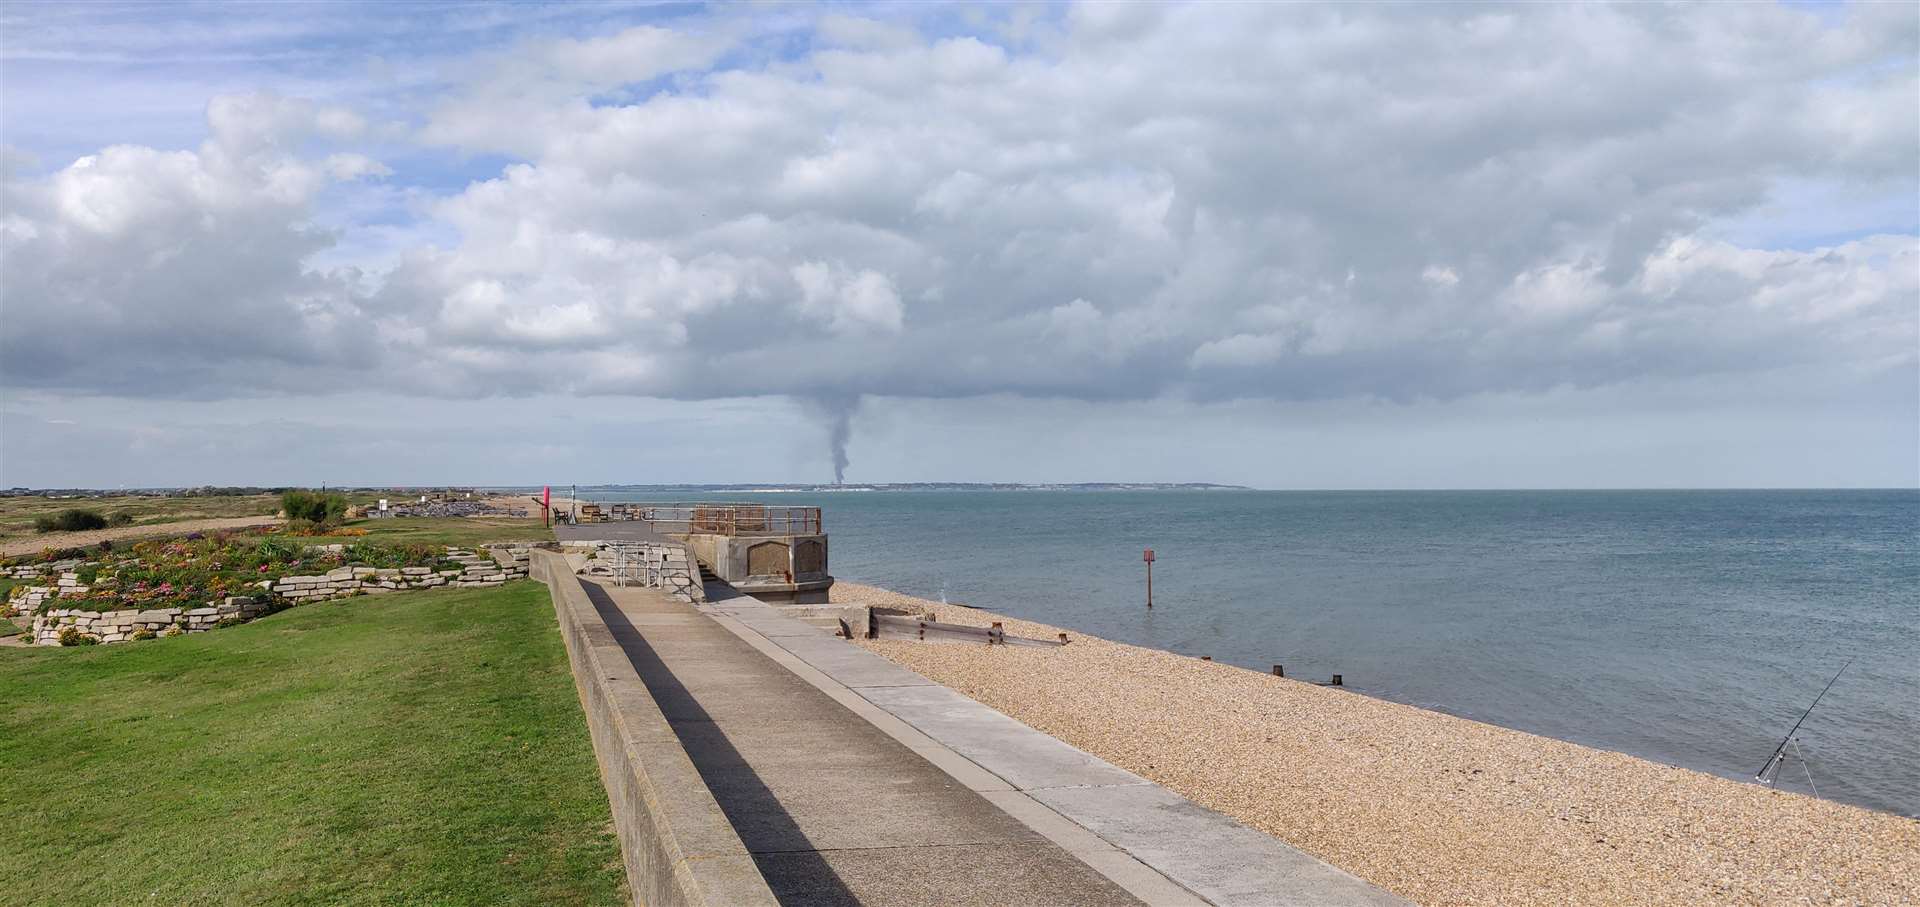 Thick black smoke could be seen from Deal